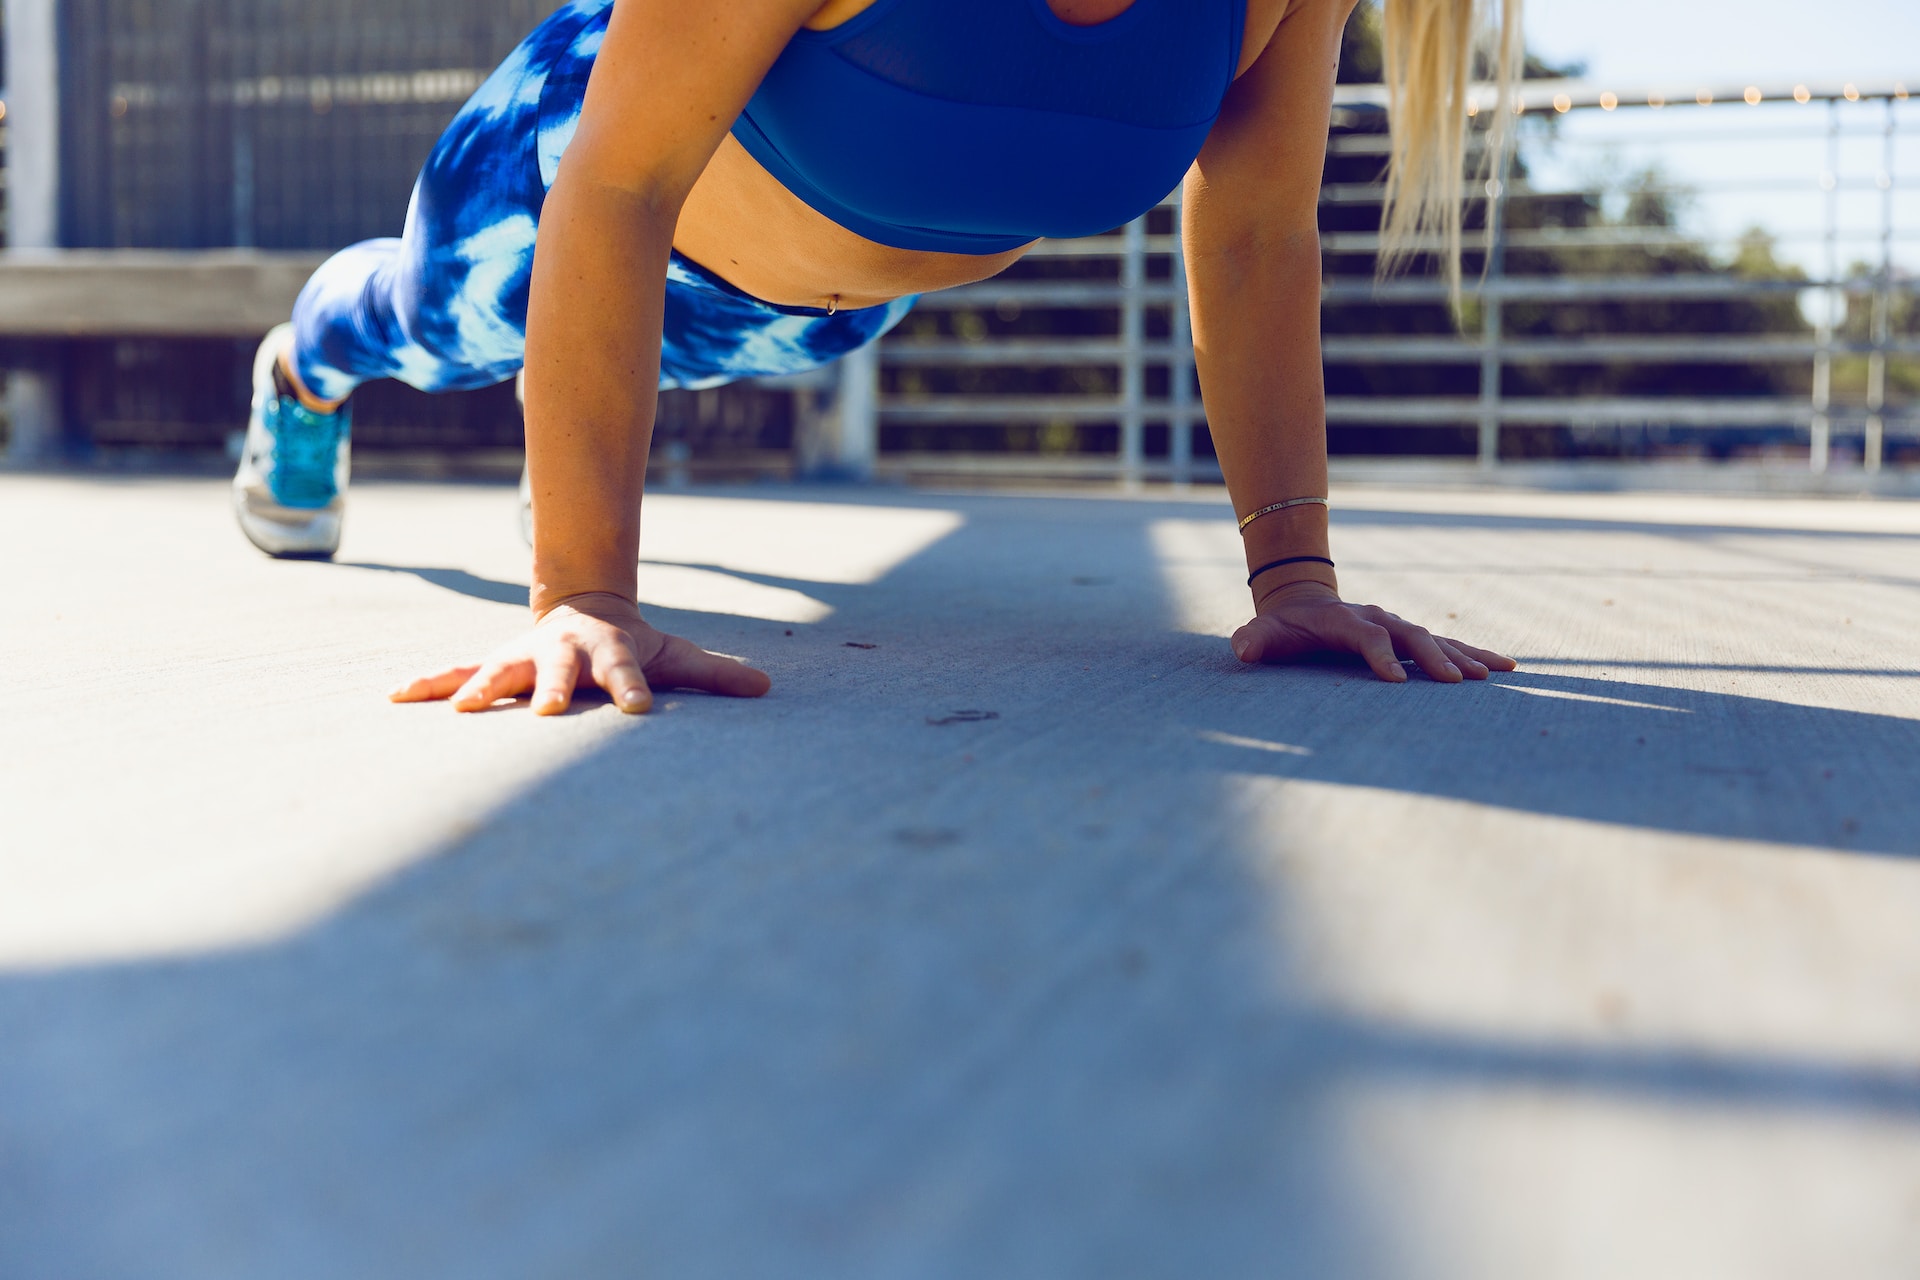 the image shows a sportswomen doing plank